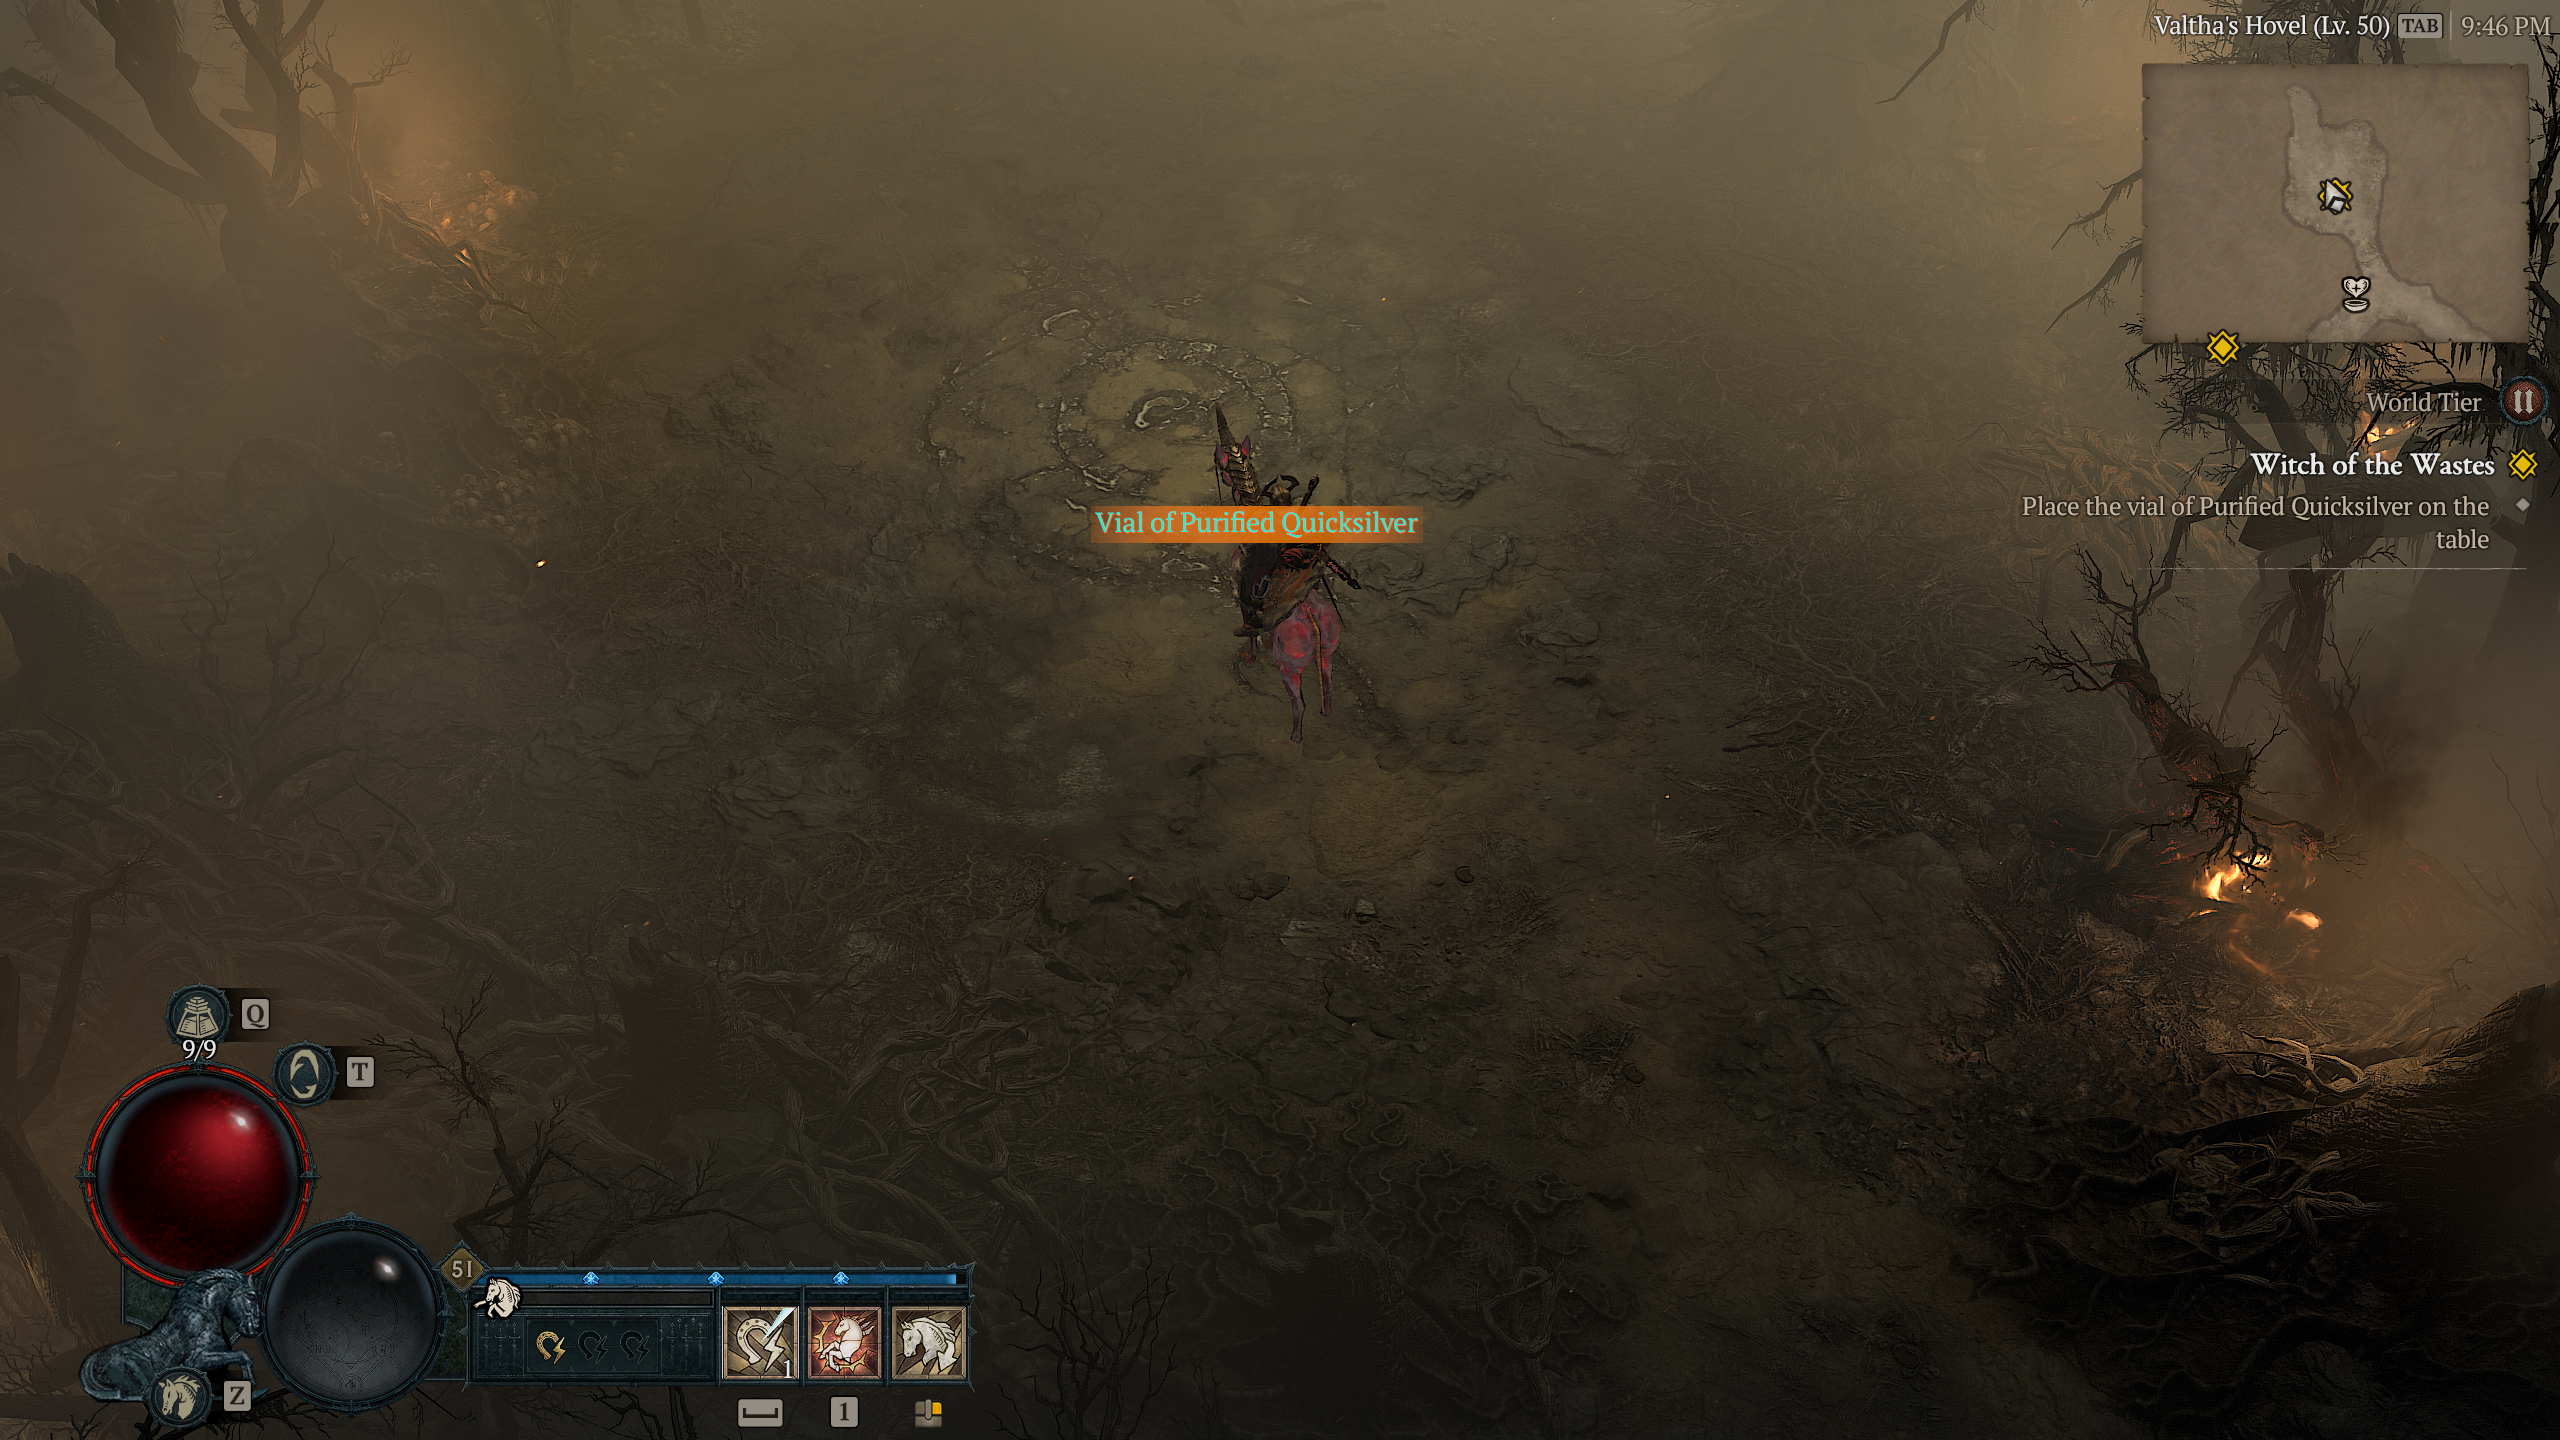 place the vial of Purified Quicksilver on the table in Diablo 4